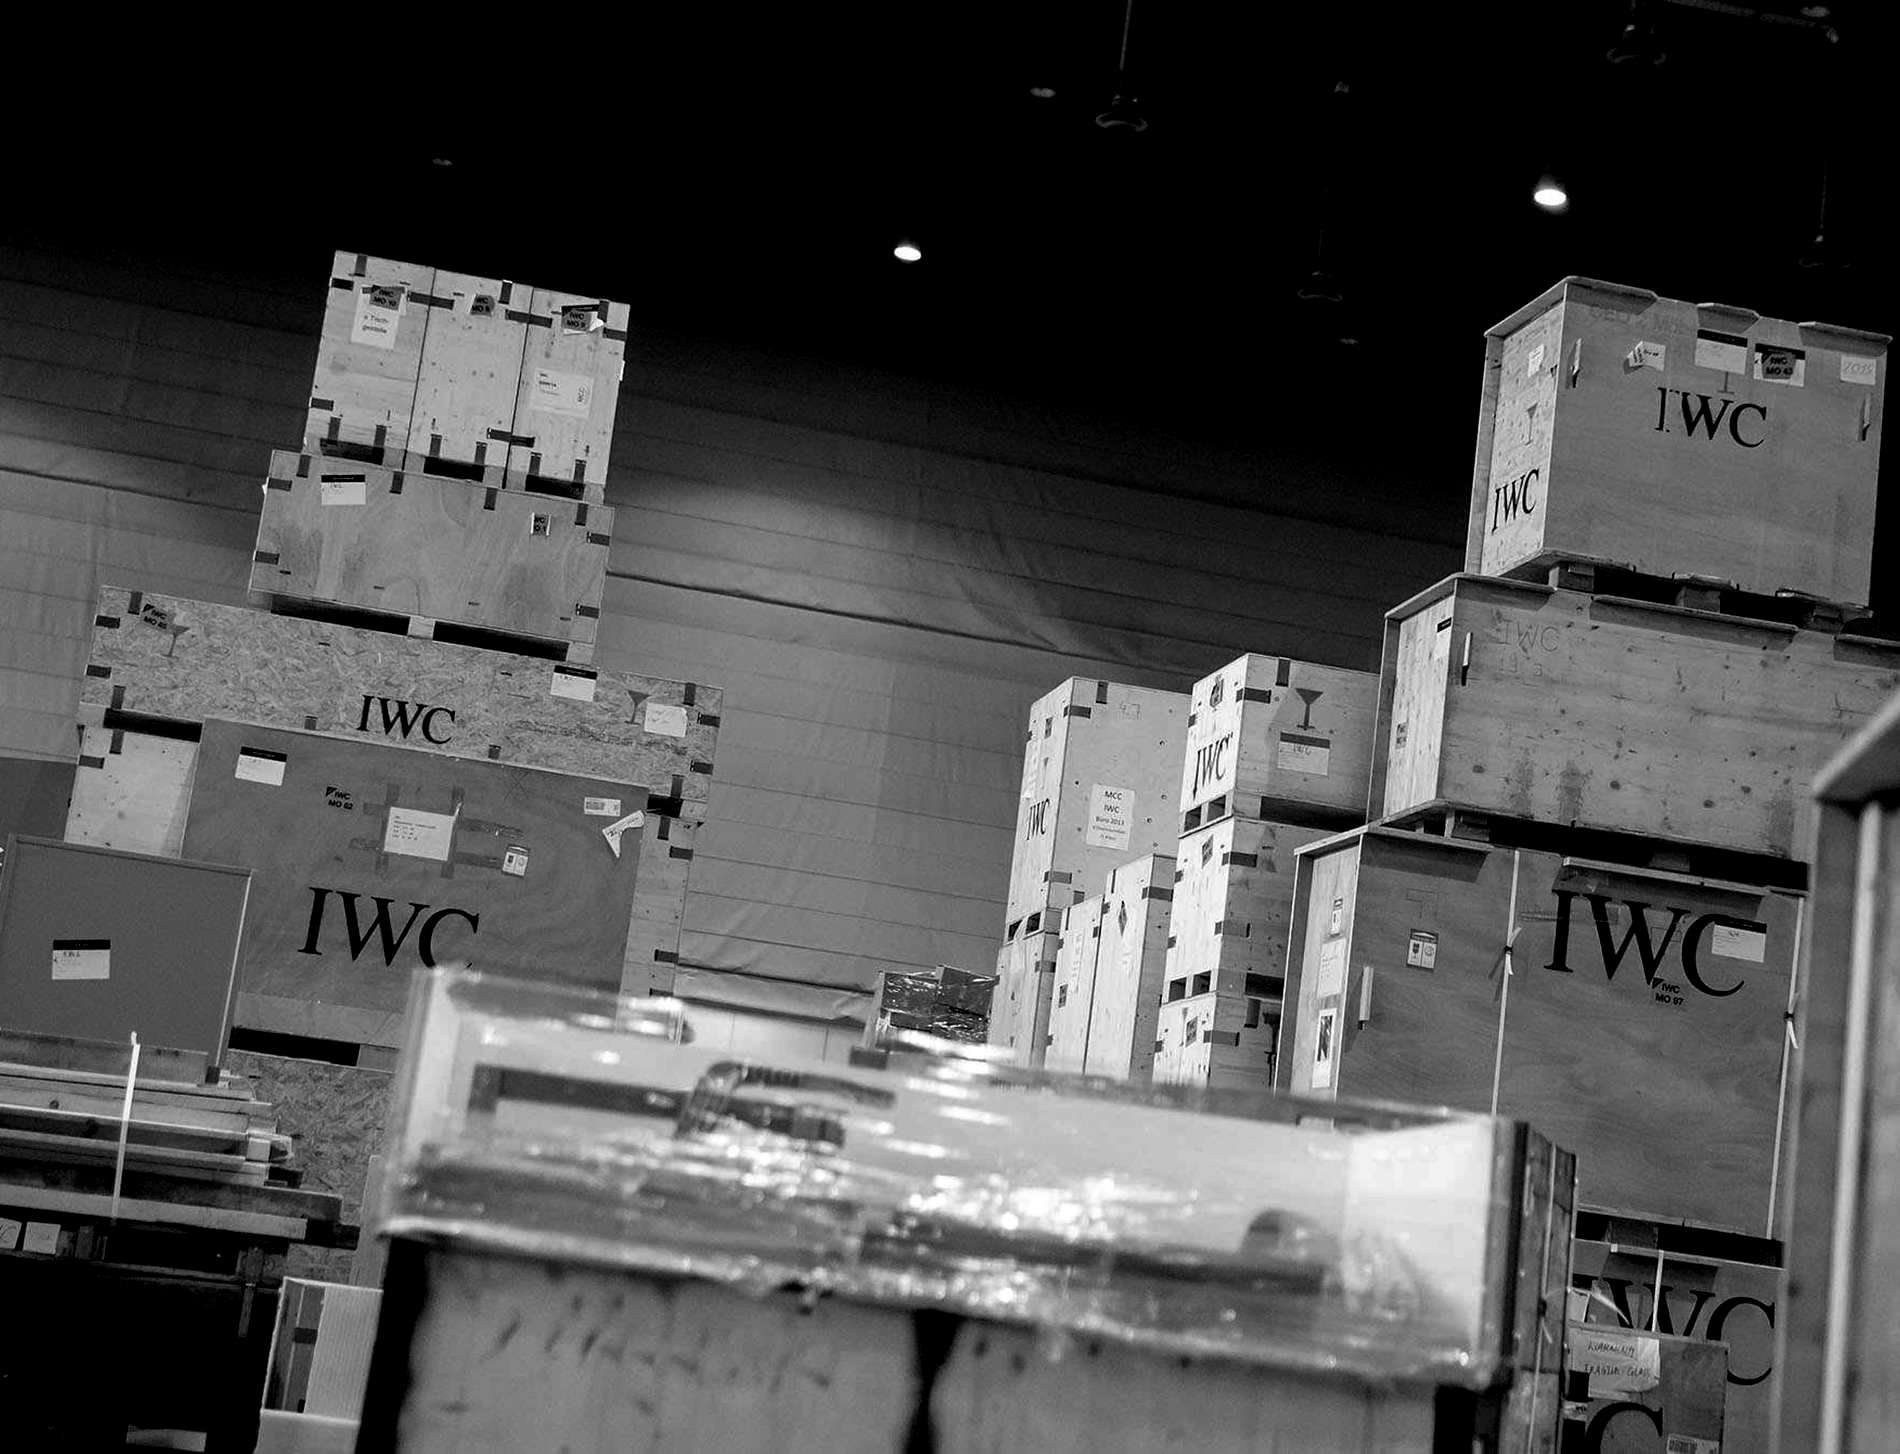 Storage and packaging of IWC goods in a warehouse